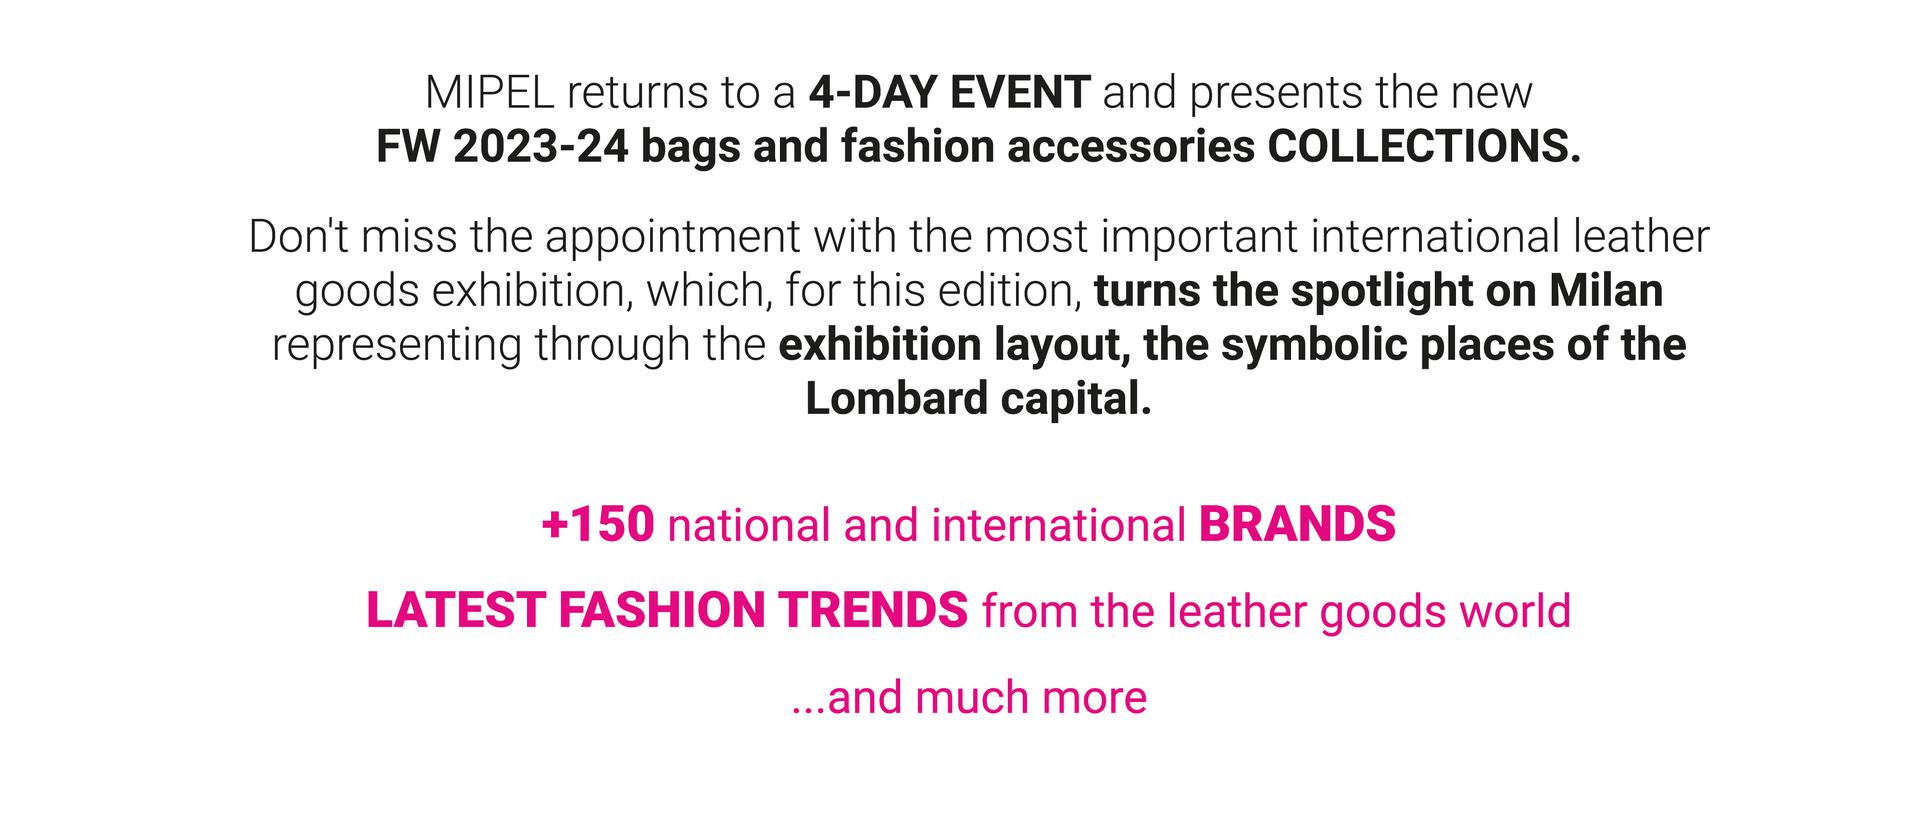 The most important B2B international event dedicated to leather goods and fashion accessories returns to FieraMilano-Rho for the 123nd edition turns the spotlight on Milan